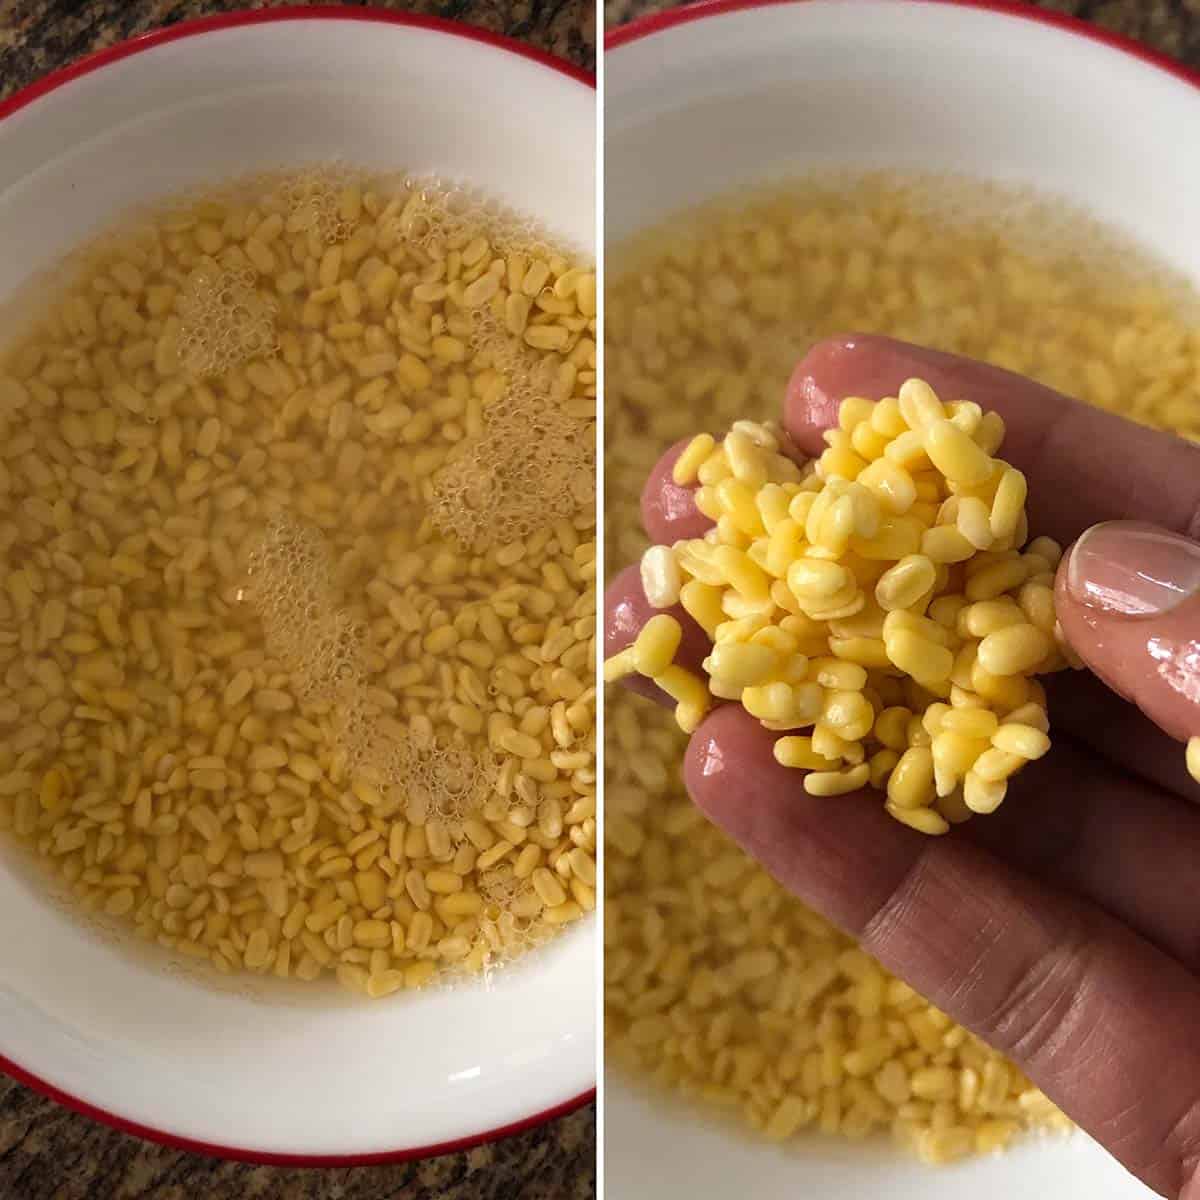 2 panel photo showing the soaking of moong dal in a white bowl.